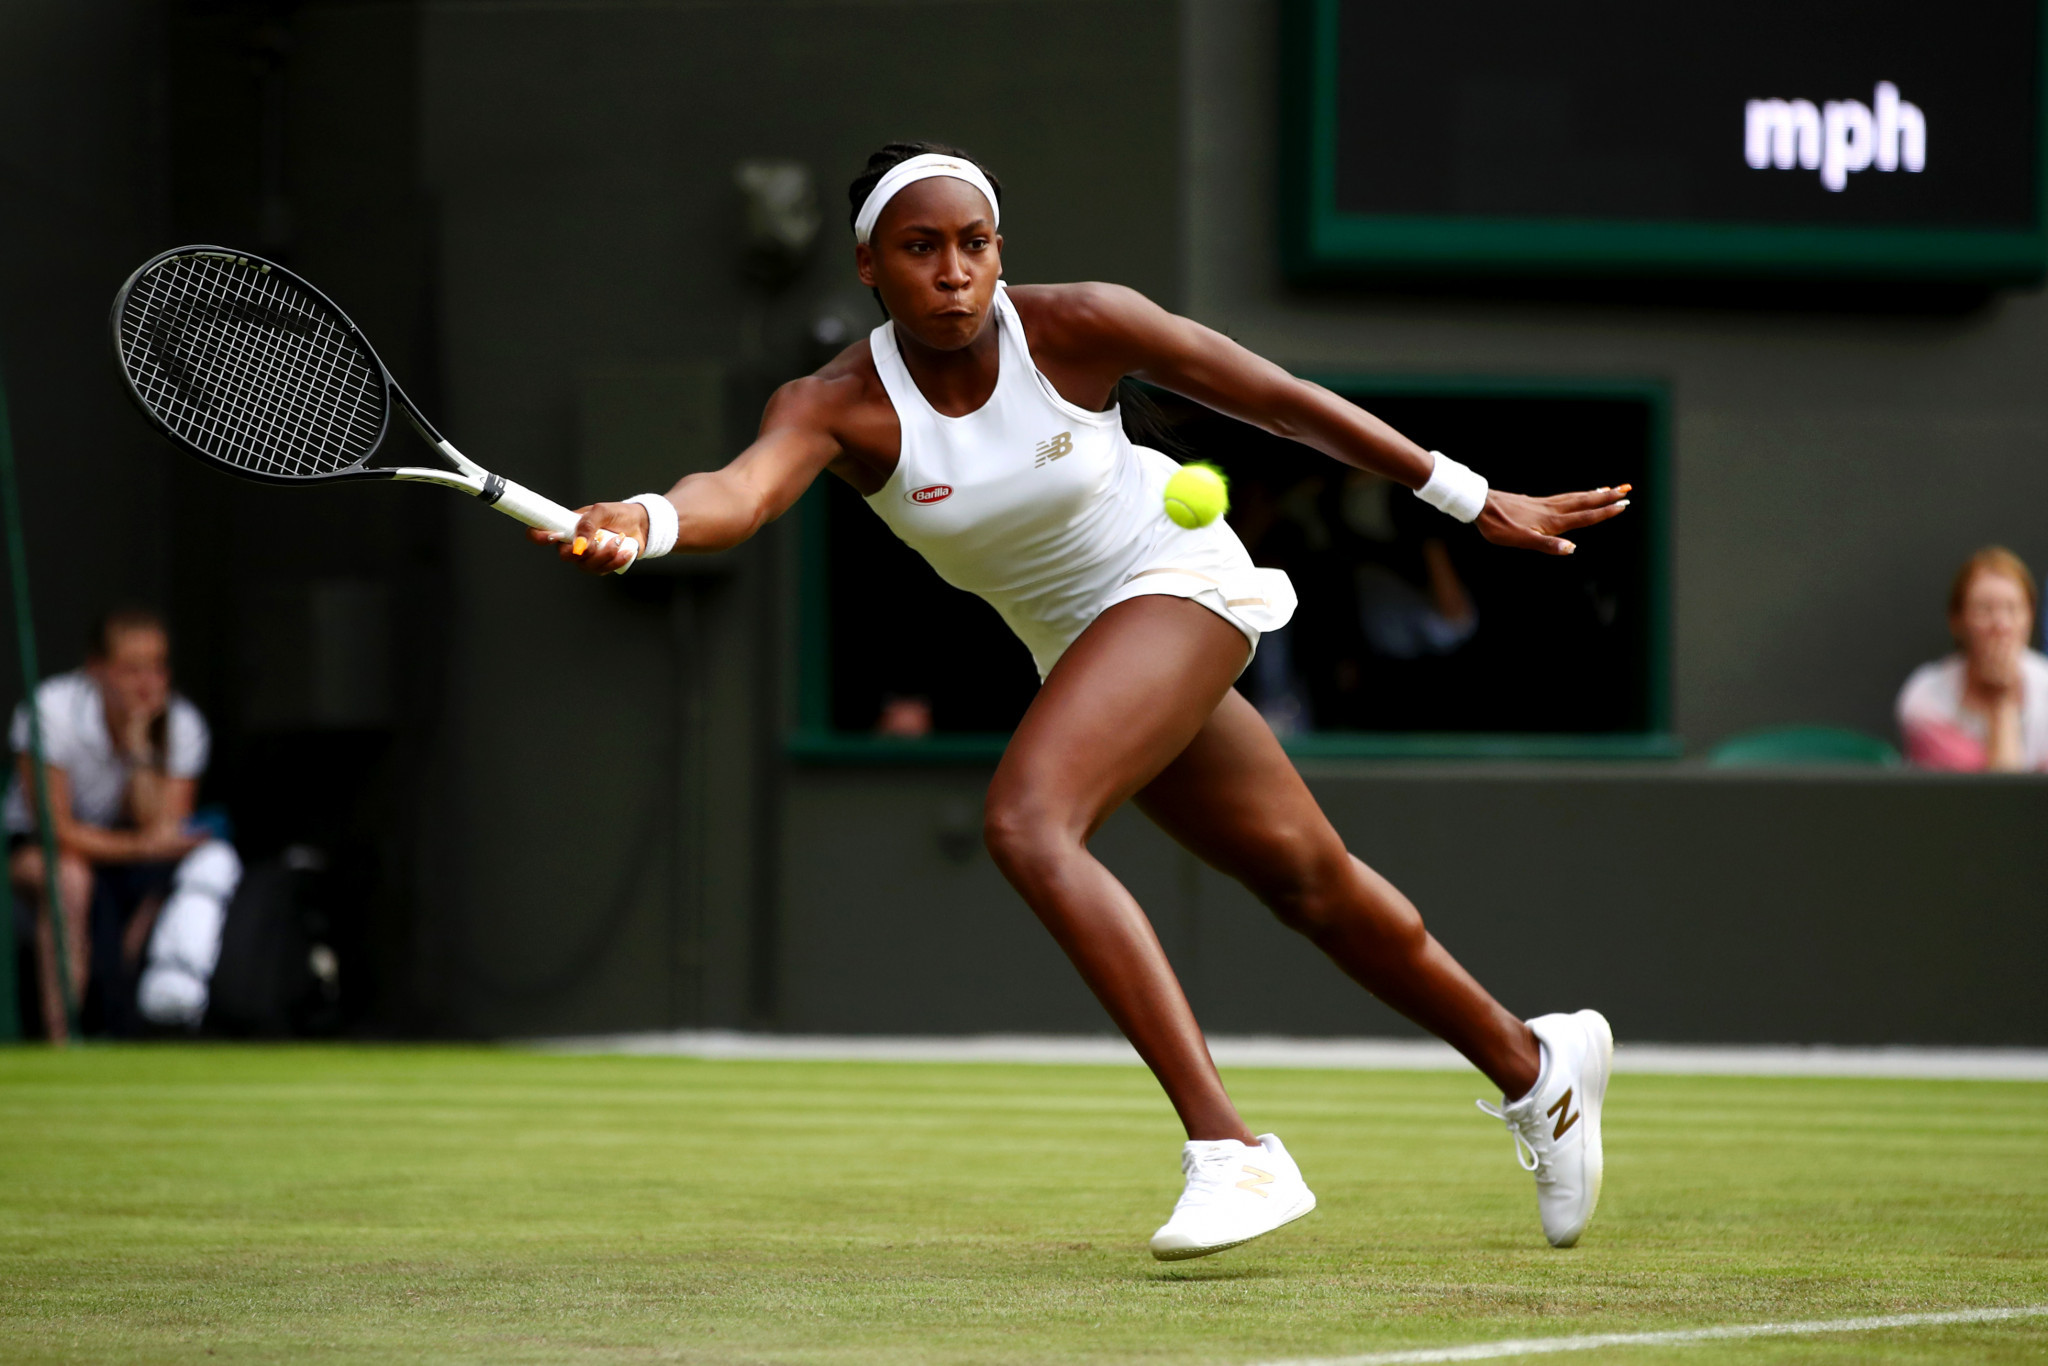 Cori Gauff, at 15 already the youngest qualifier at a Grand Slam tournament in the 41-year history of the Open era, caused an even bigger shock by beating fellow American Venus Williams ©Getty Images